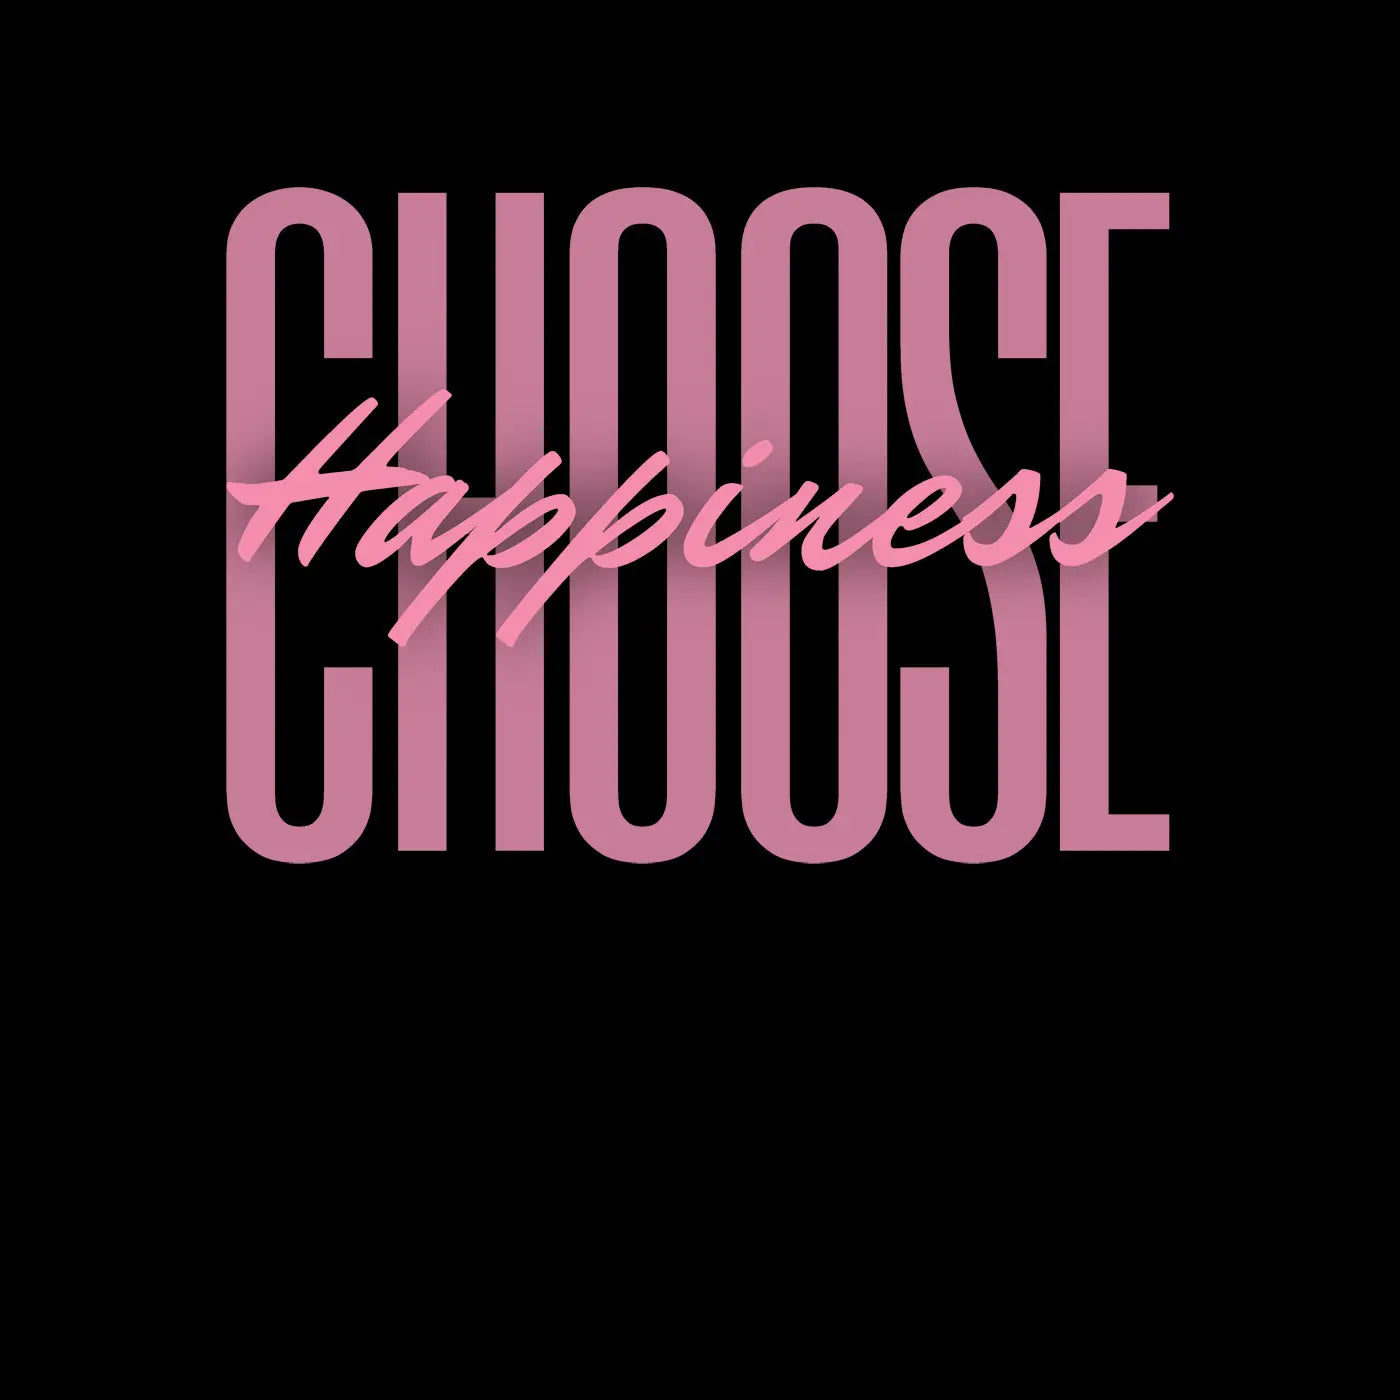 Choose-Happiness - BC Ink Works